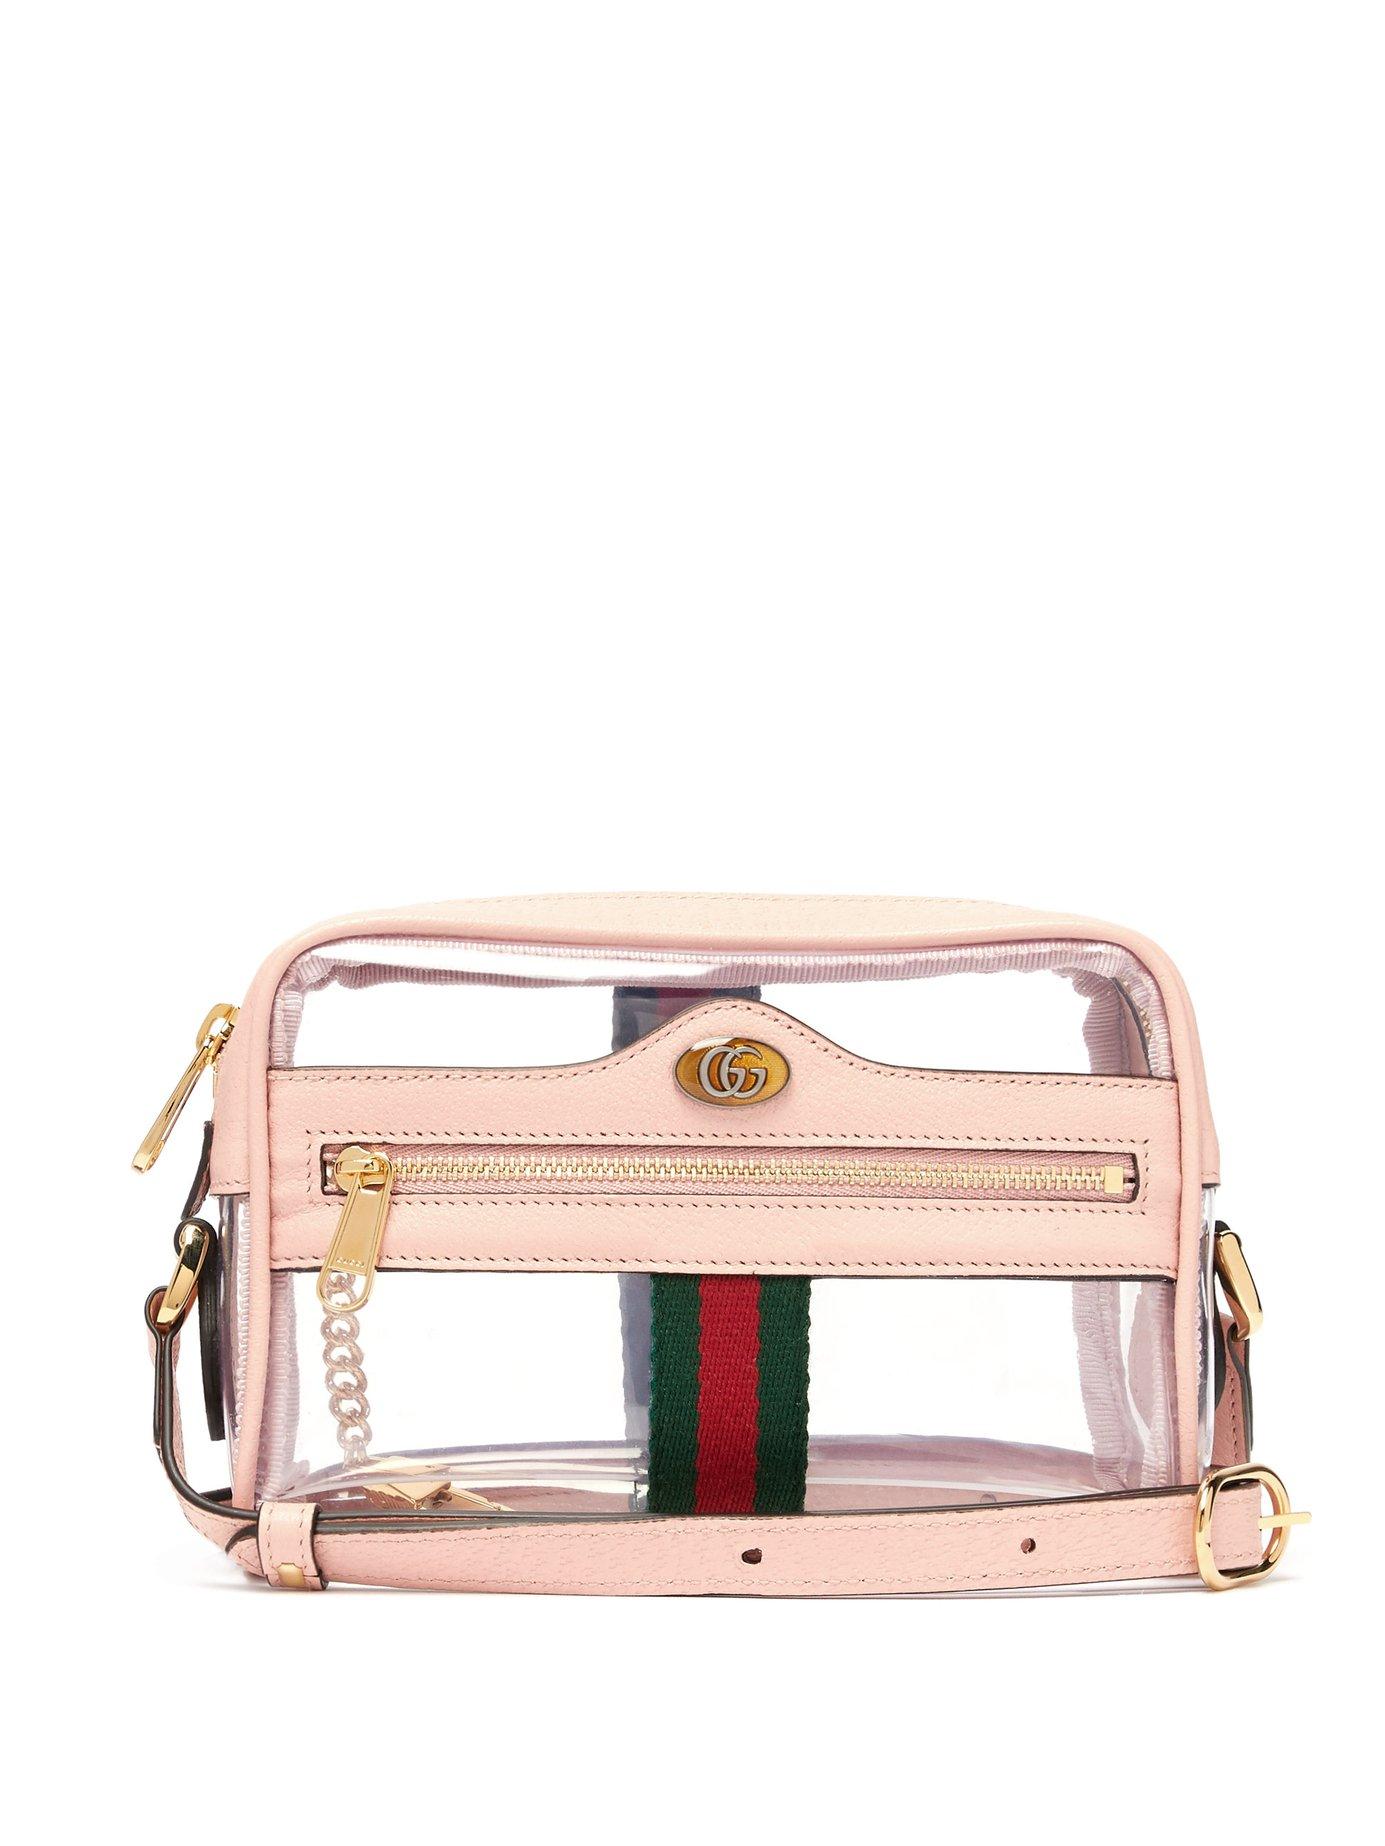 Gucci Ophidia Mini Pvc And Leather Cross Body Bag in Light Pink (Pink) - Lyst